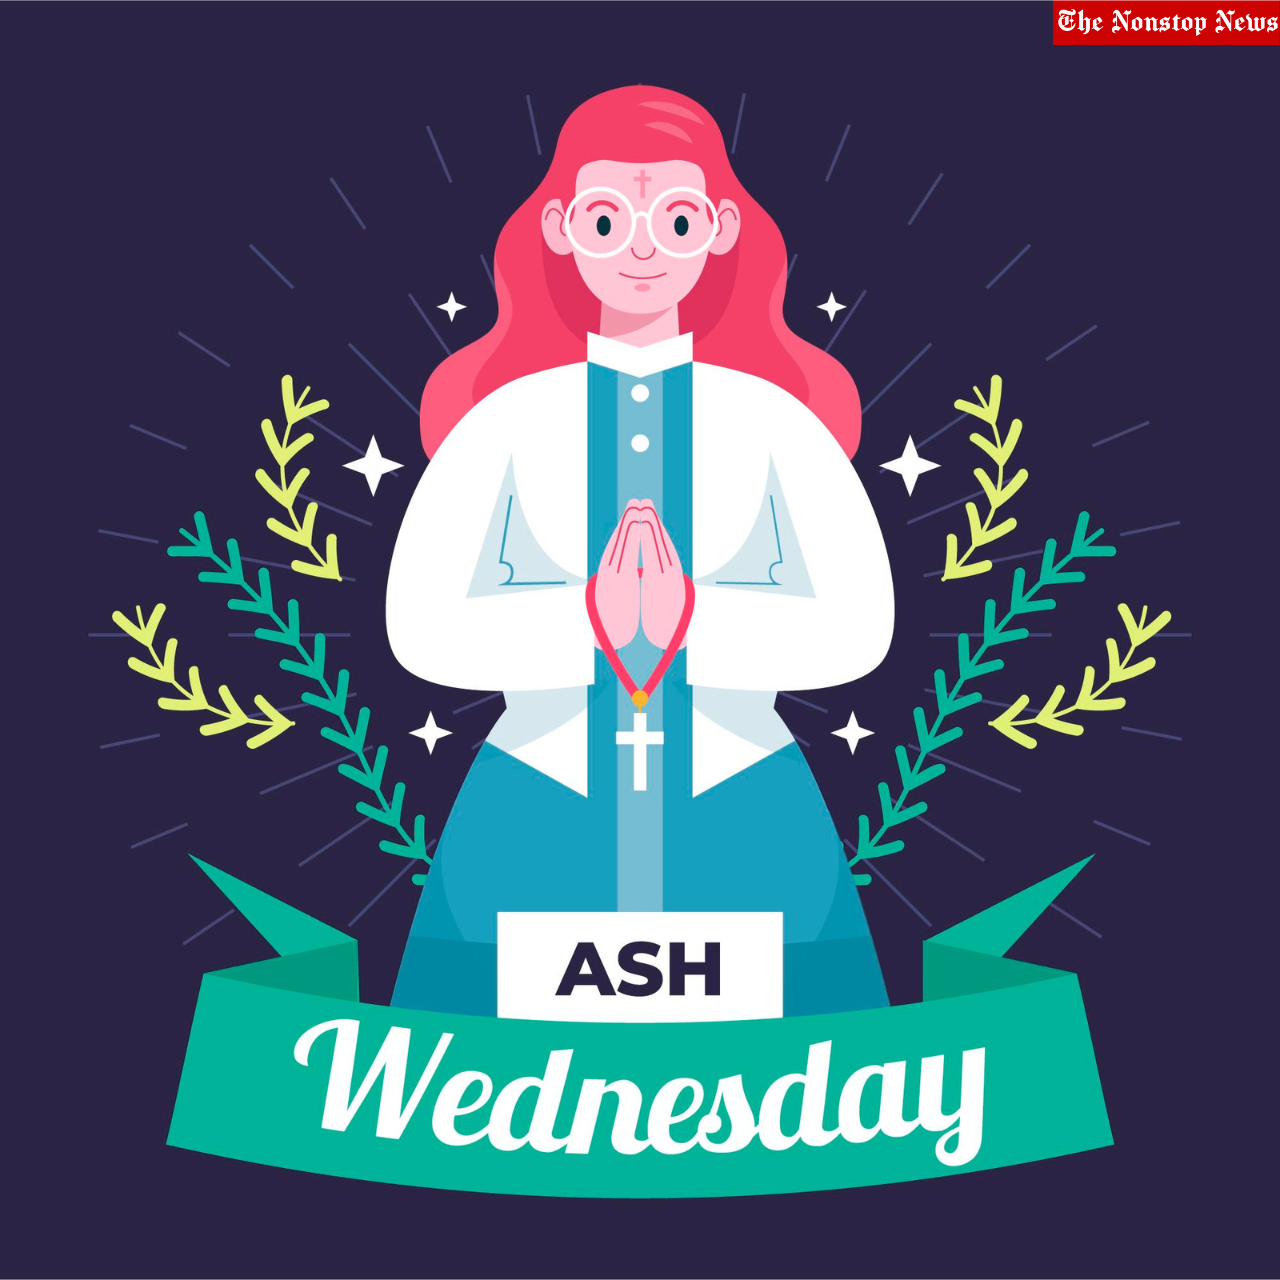 Happy Ash Wednesday 2023 Tamil Images, Wishes, Greetings, Quotes, Messages, Posters, Banners, Slogans, and Sayings